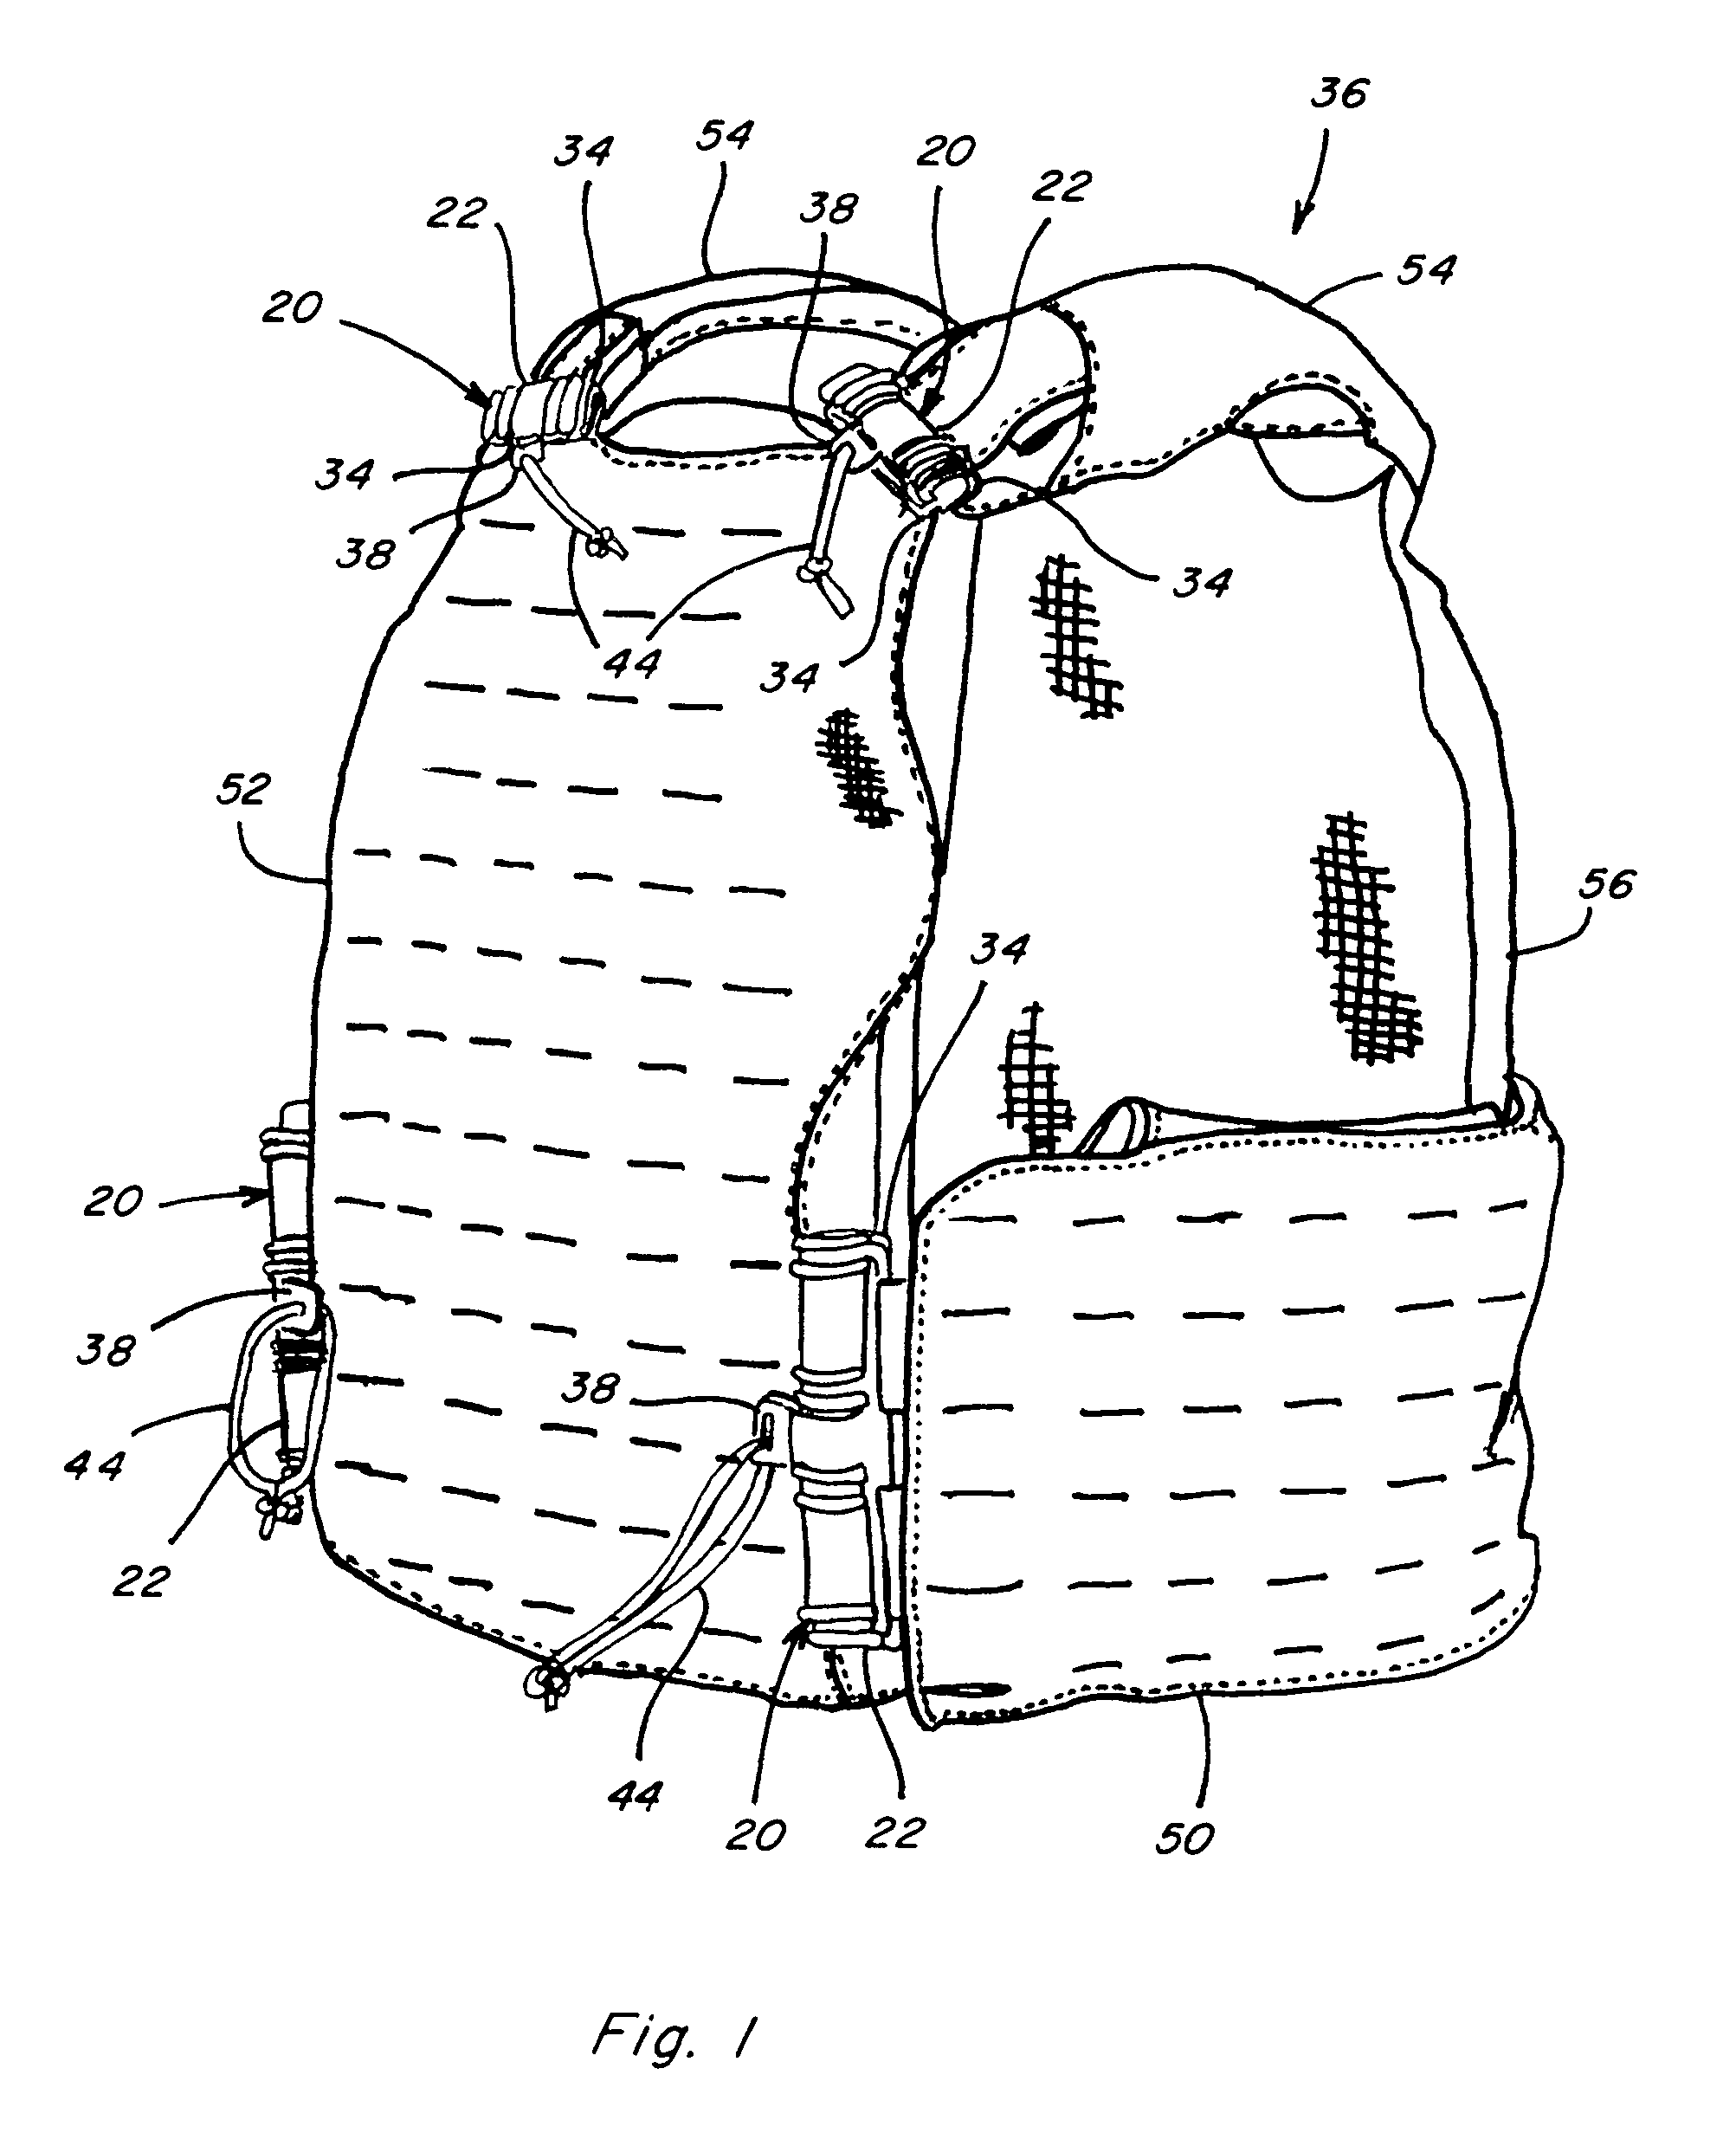 Garment assembly and release apparatus and method